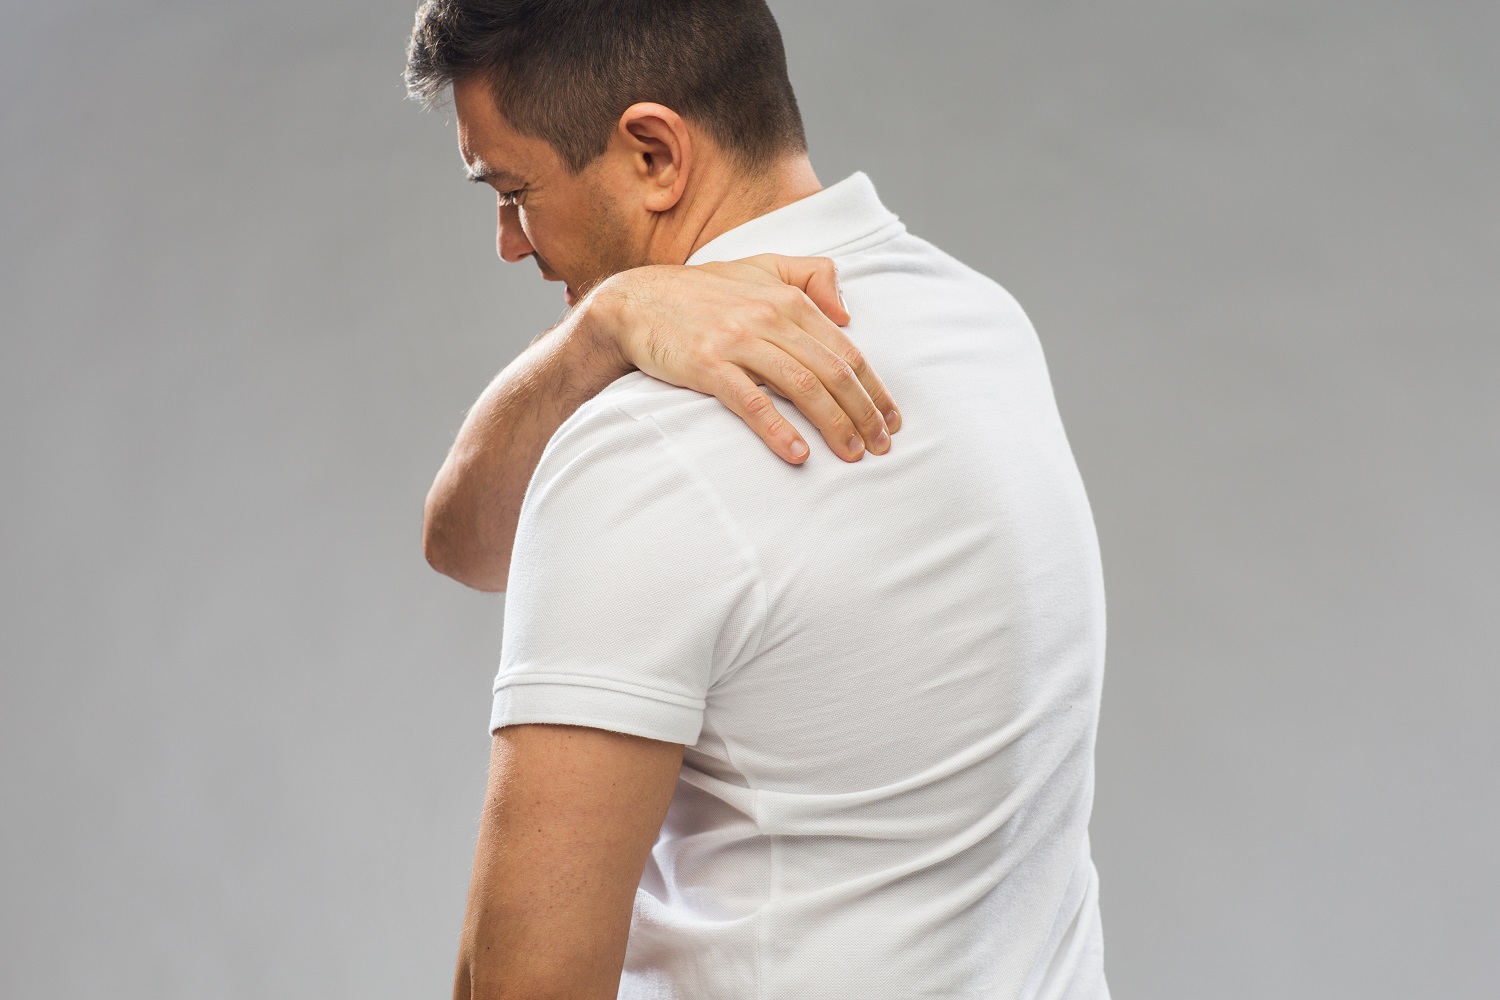 5 Common Causes of Upper Back Pain | Sinicropi Cervical Spine